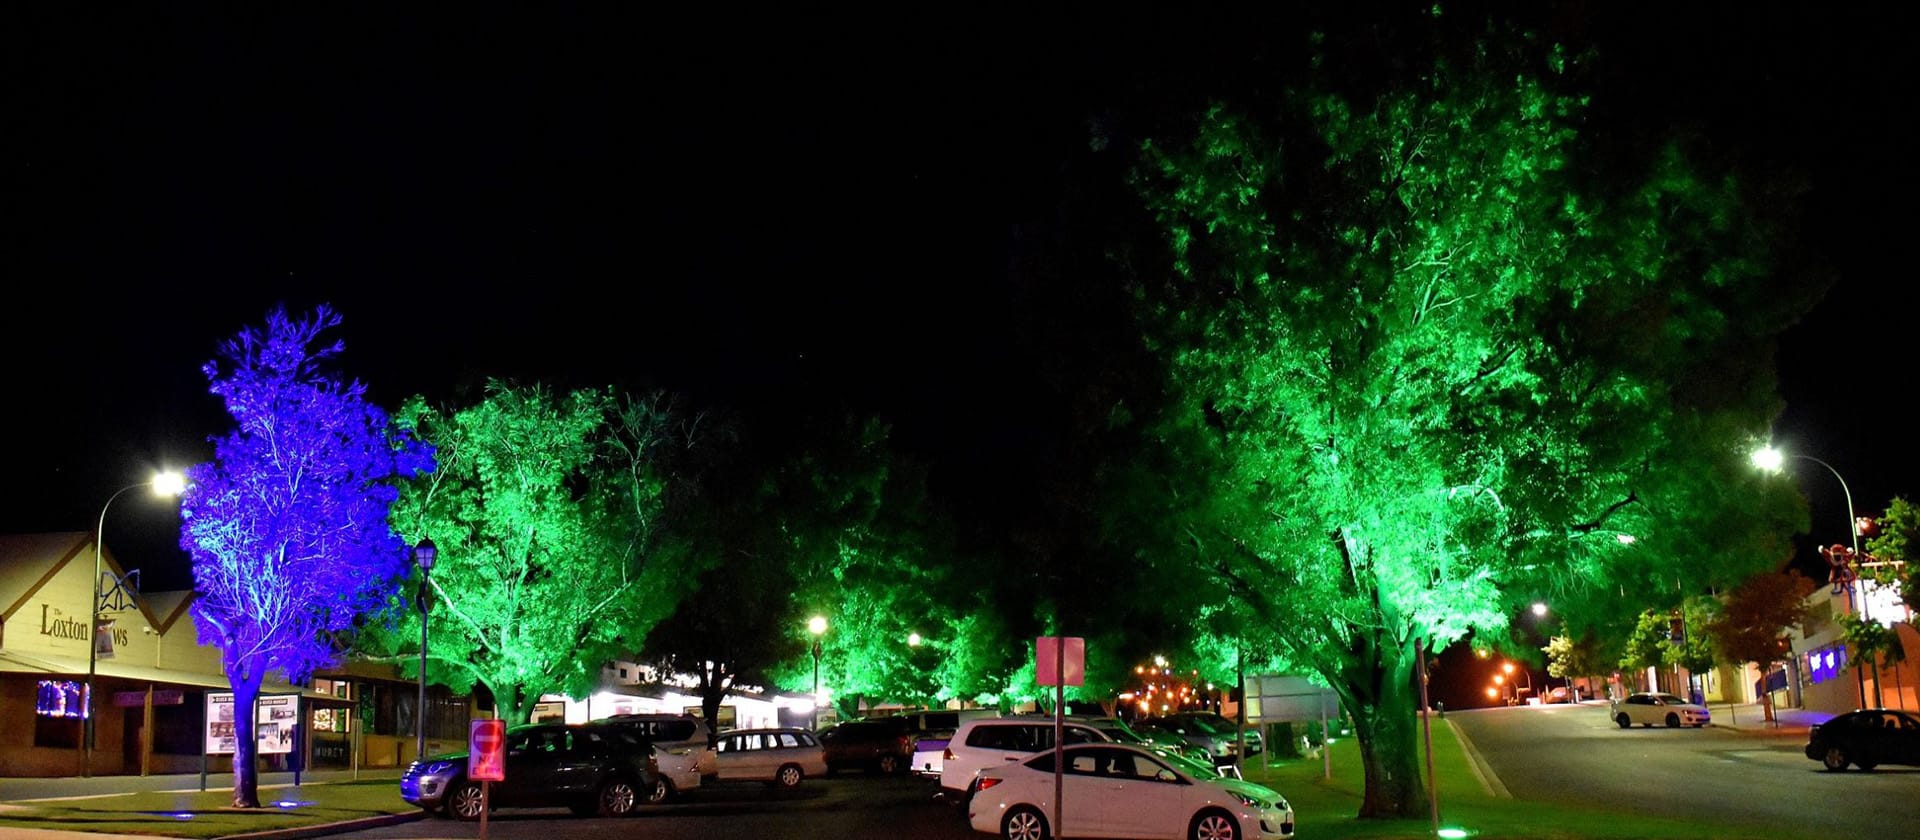 Trees in Loxton lit up for Christmas